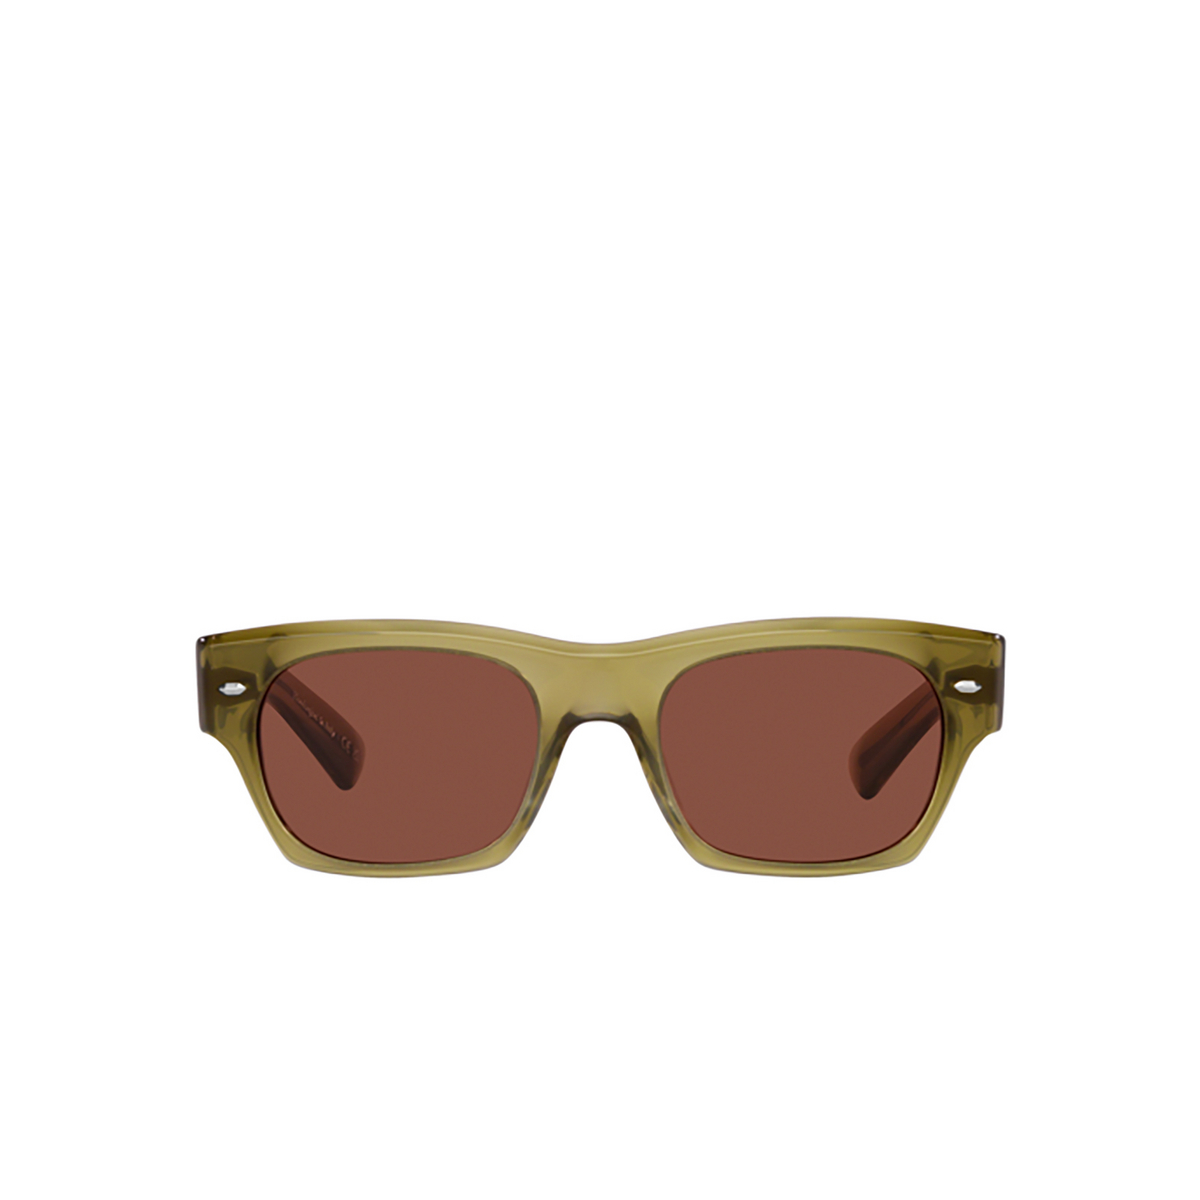 Oliver Peoples KASDAN Sunglasses 1678C5 Dusty Olive - front view